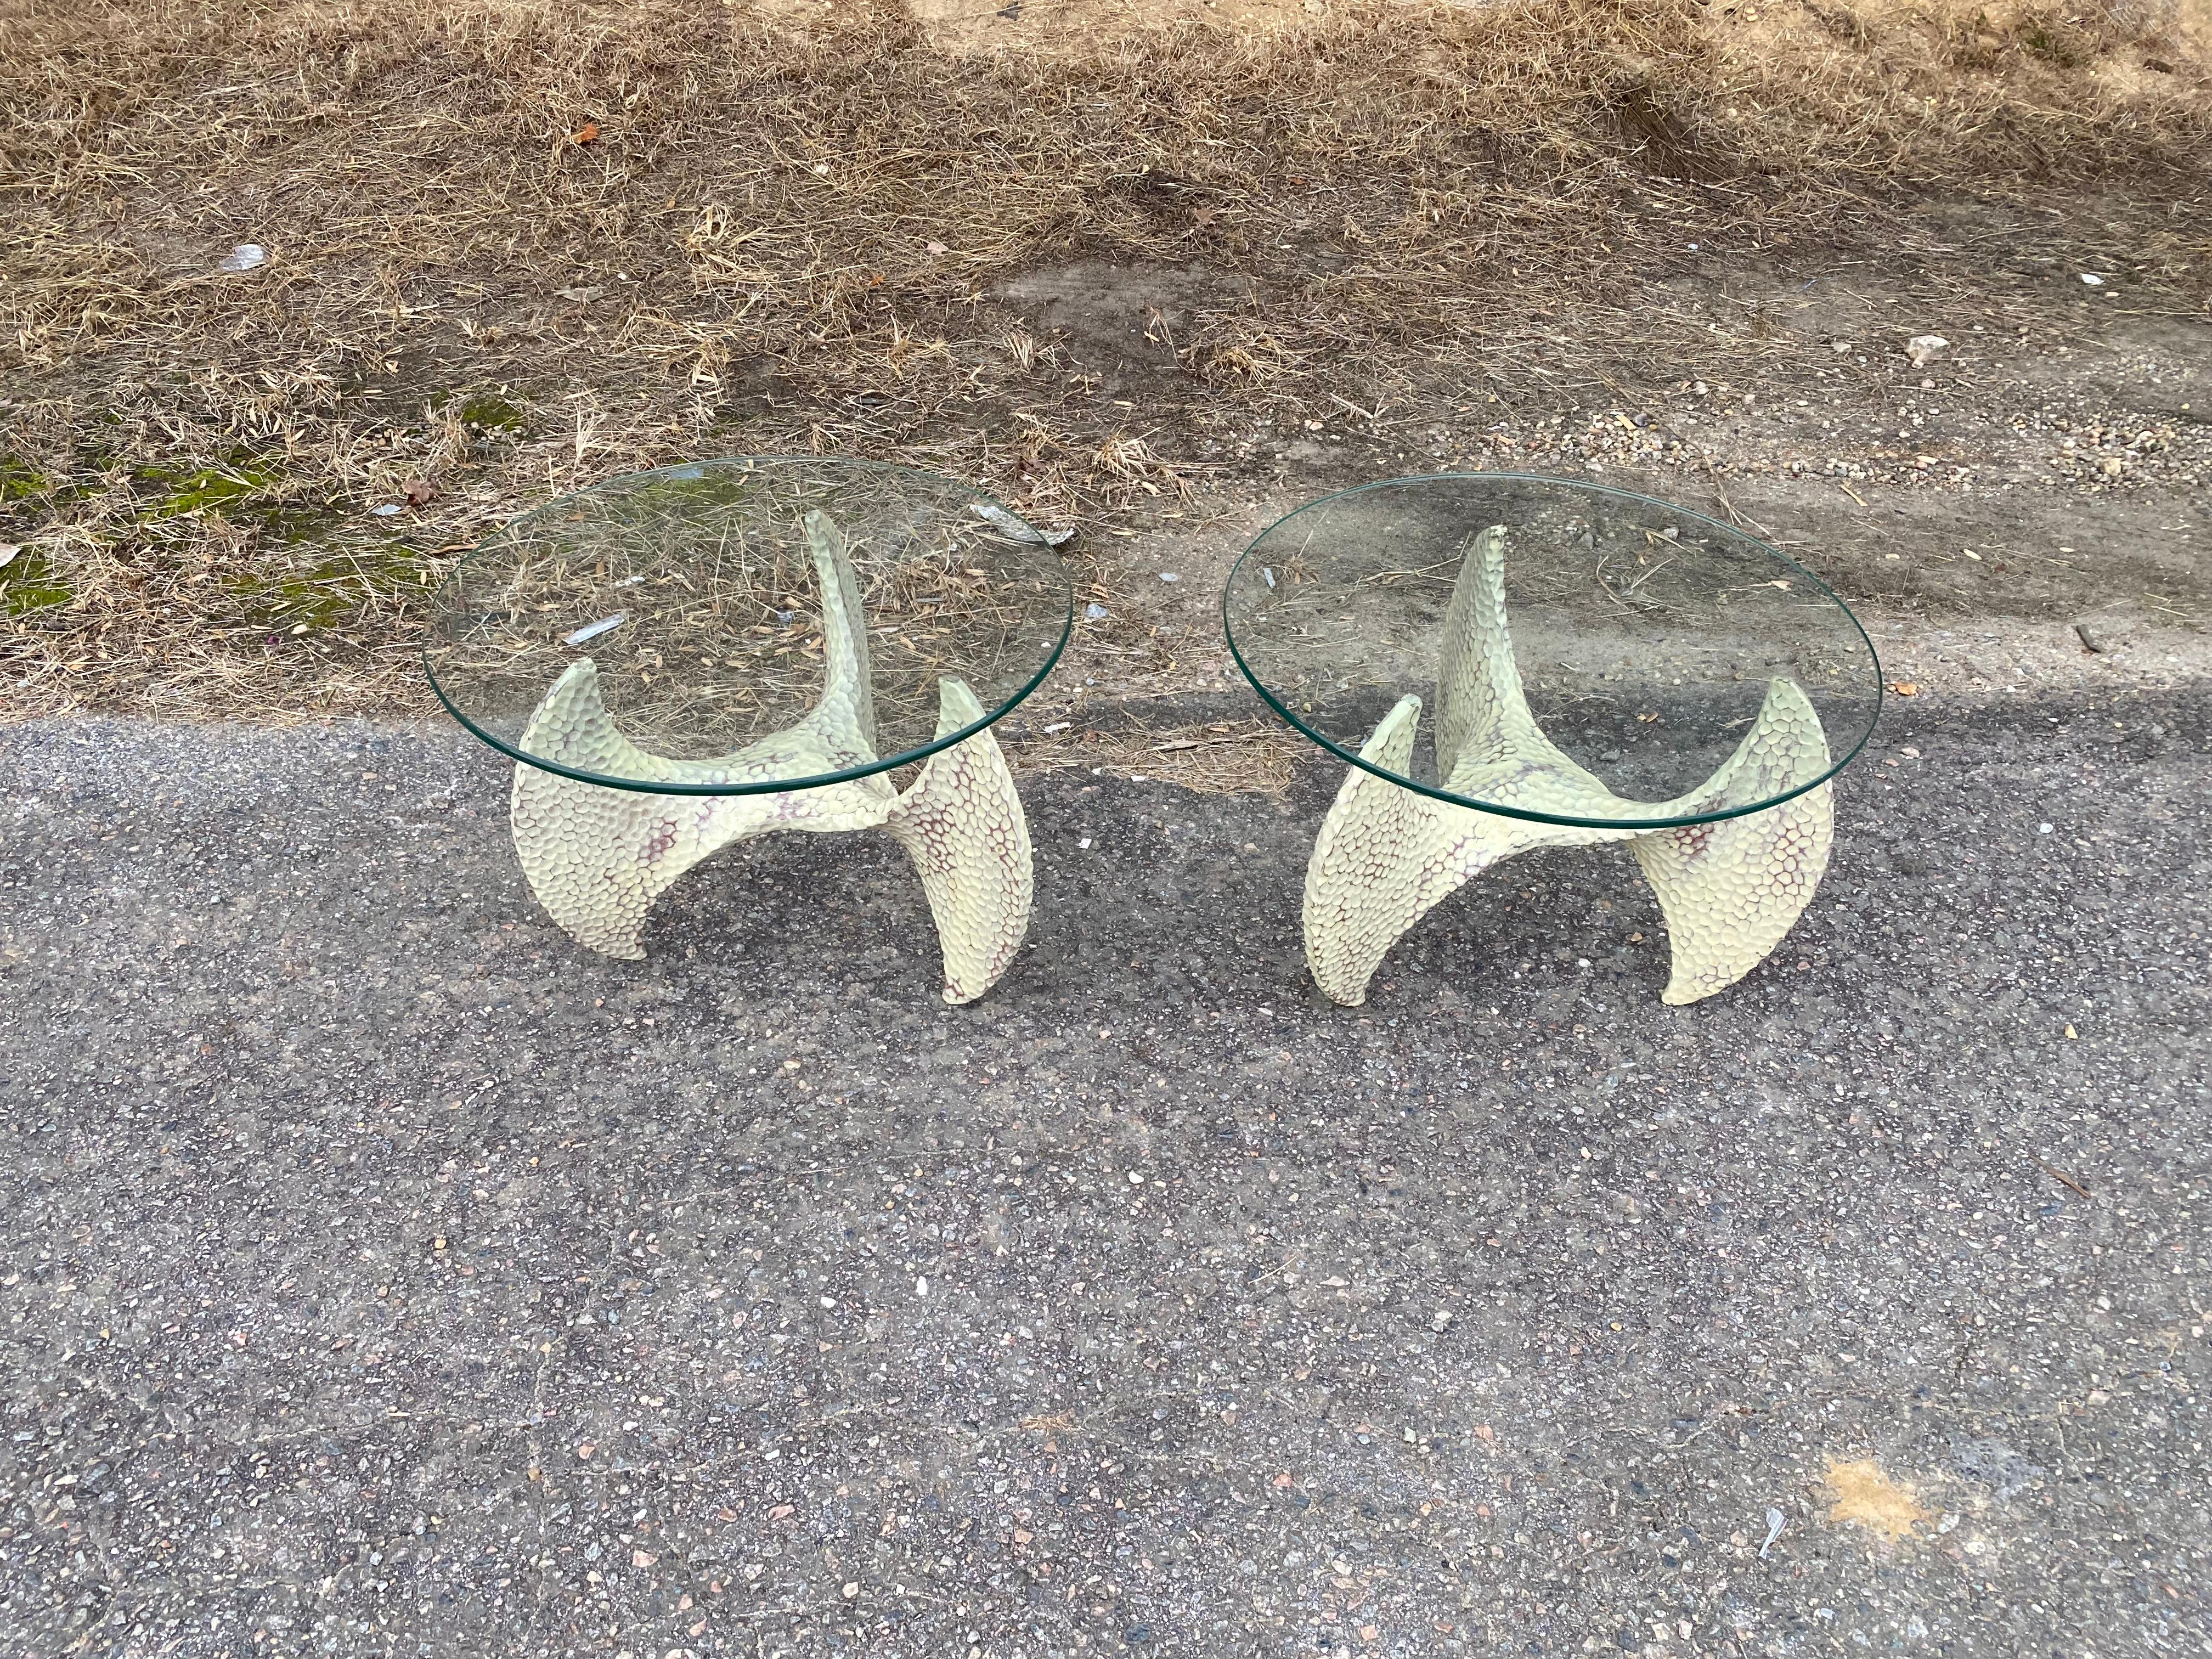 Great pair of vintage propellor form side tables. Dimpled and painted aluminum bases with glass tops.